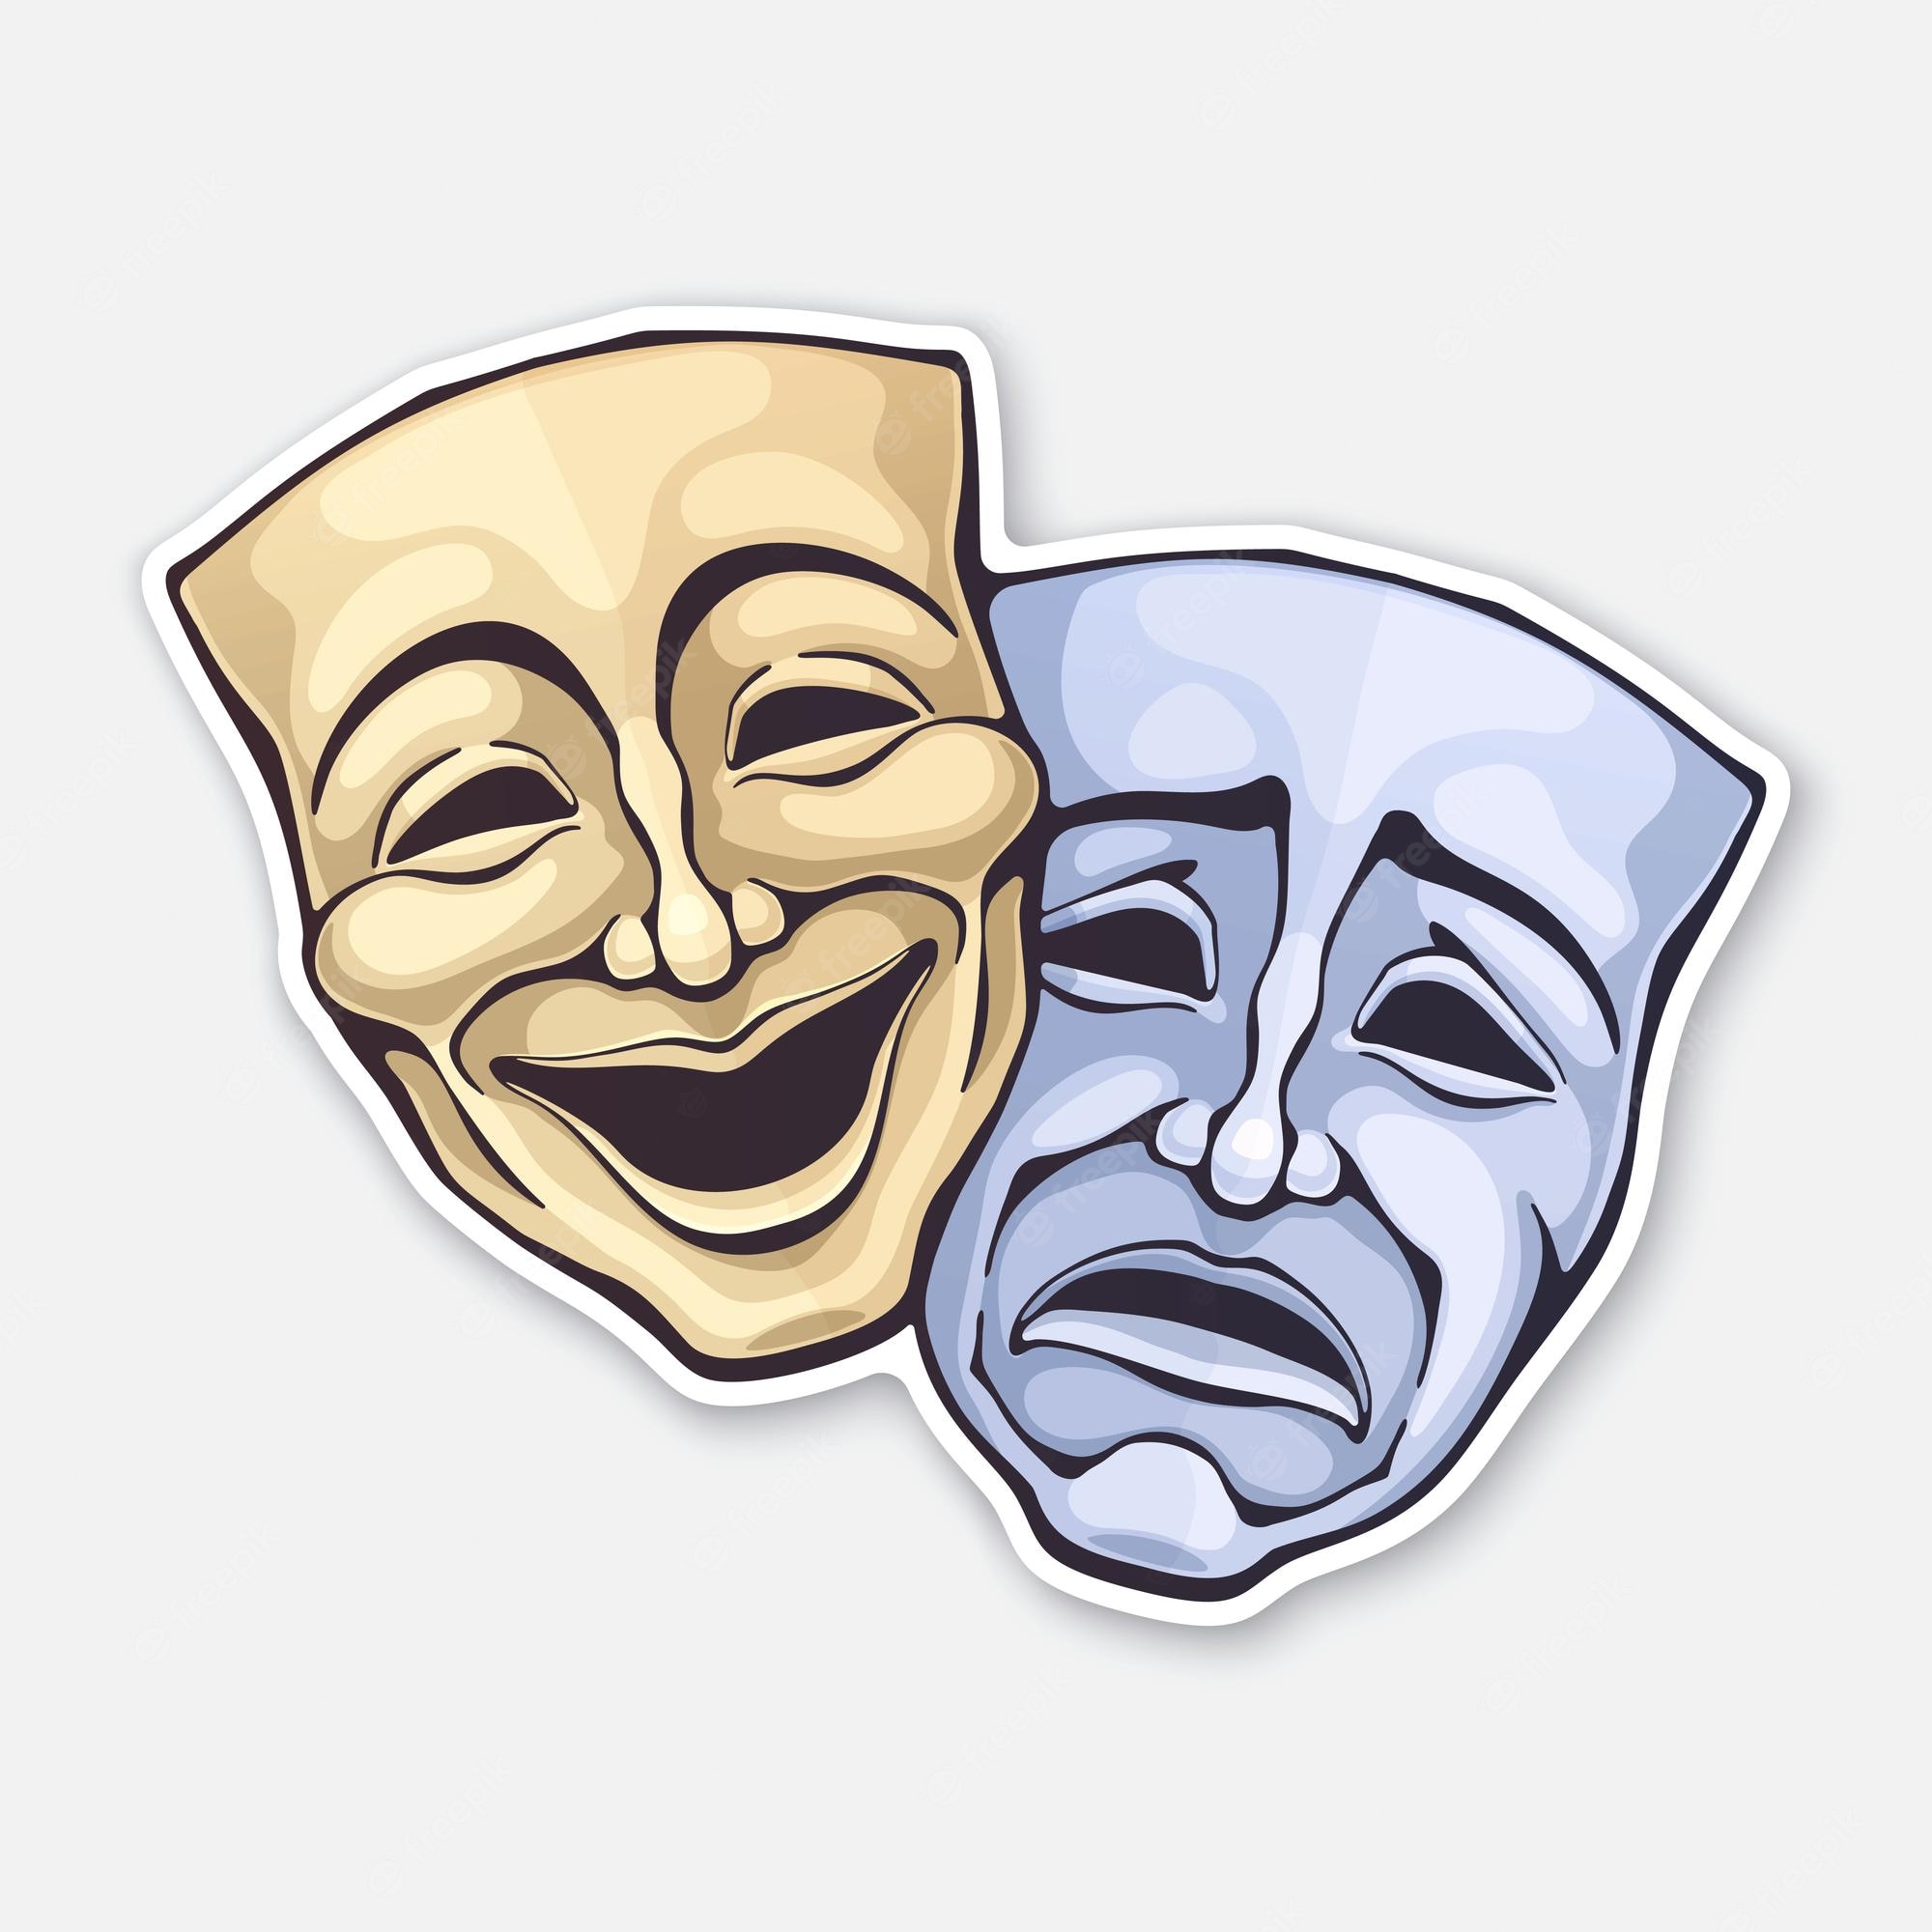 two-theatrical-comedy-drama-mask-vector-illustration_501907-1380.jpg